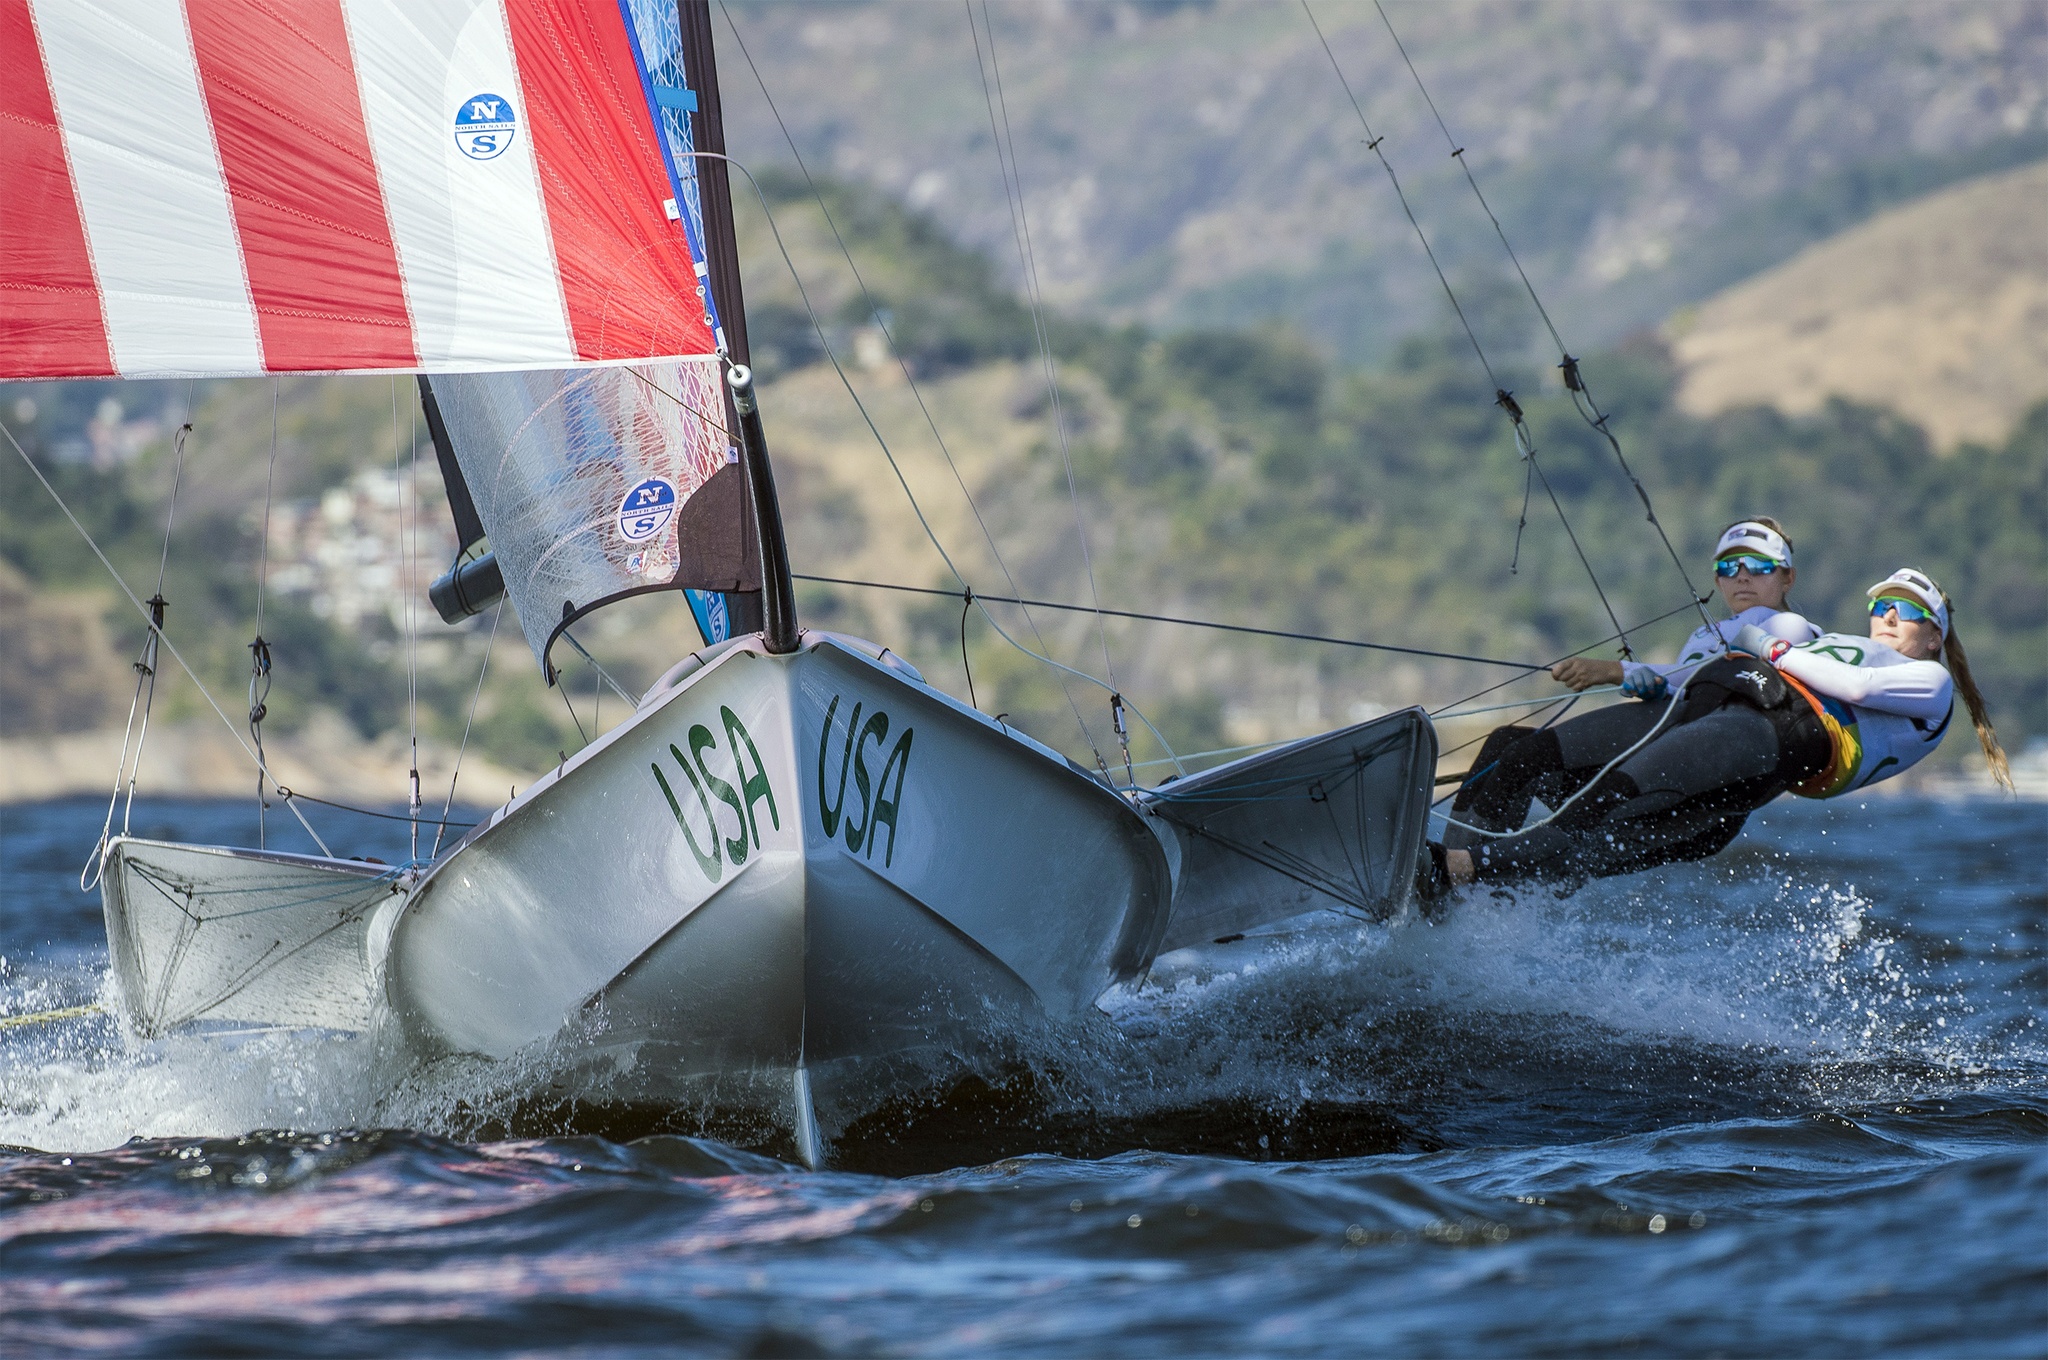 Helena Scutt and Paris Henken compete in the Women’s 49erFX sailing division at the 2016 Summer Olympics in Rio de Janeiro